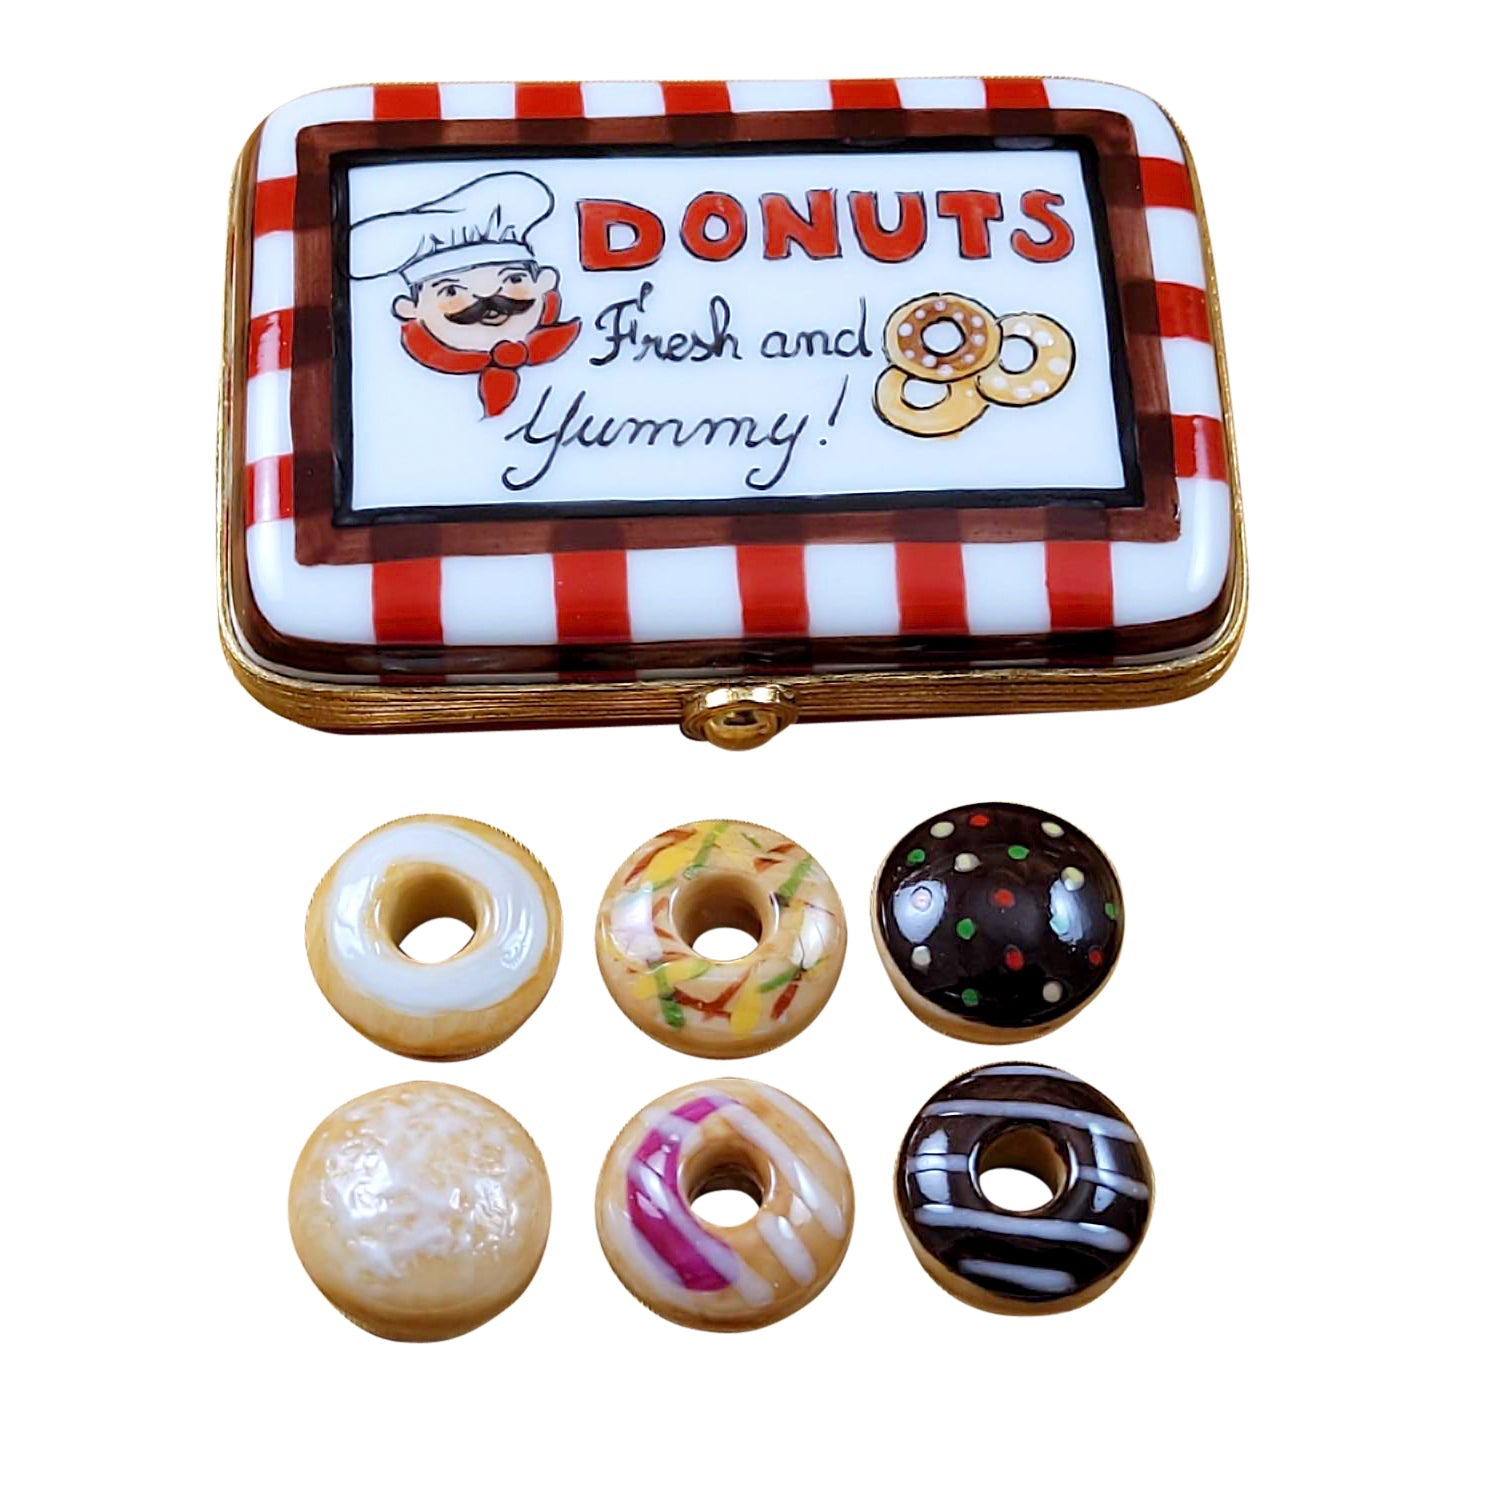 Donut Box with Six Donuts Limoges Porcelain Box